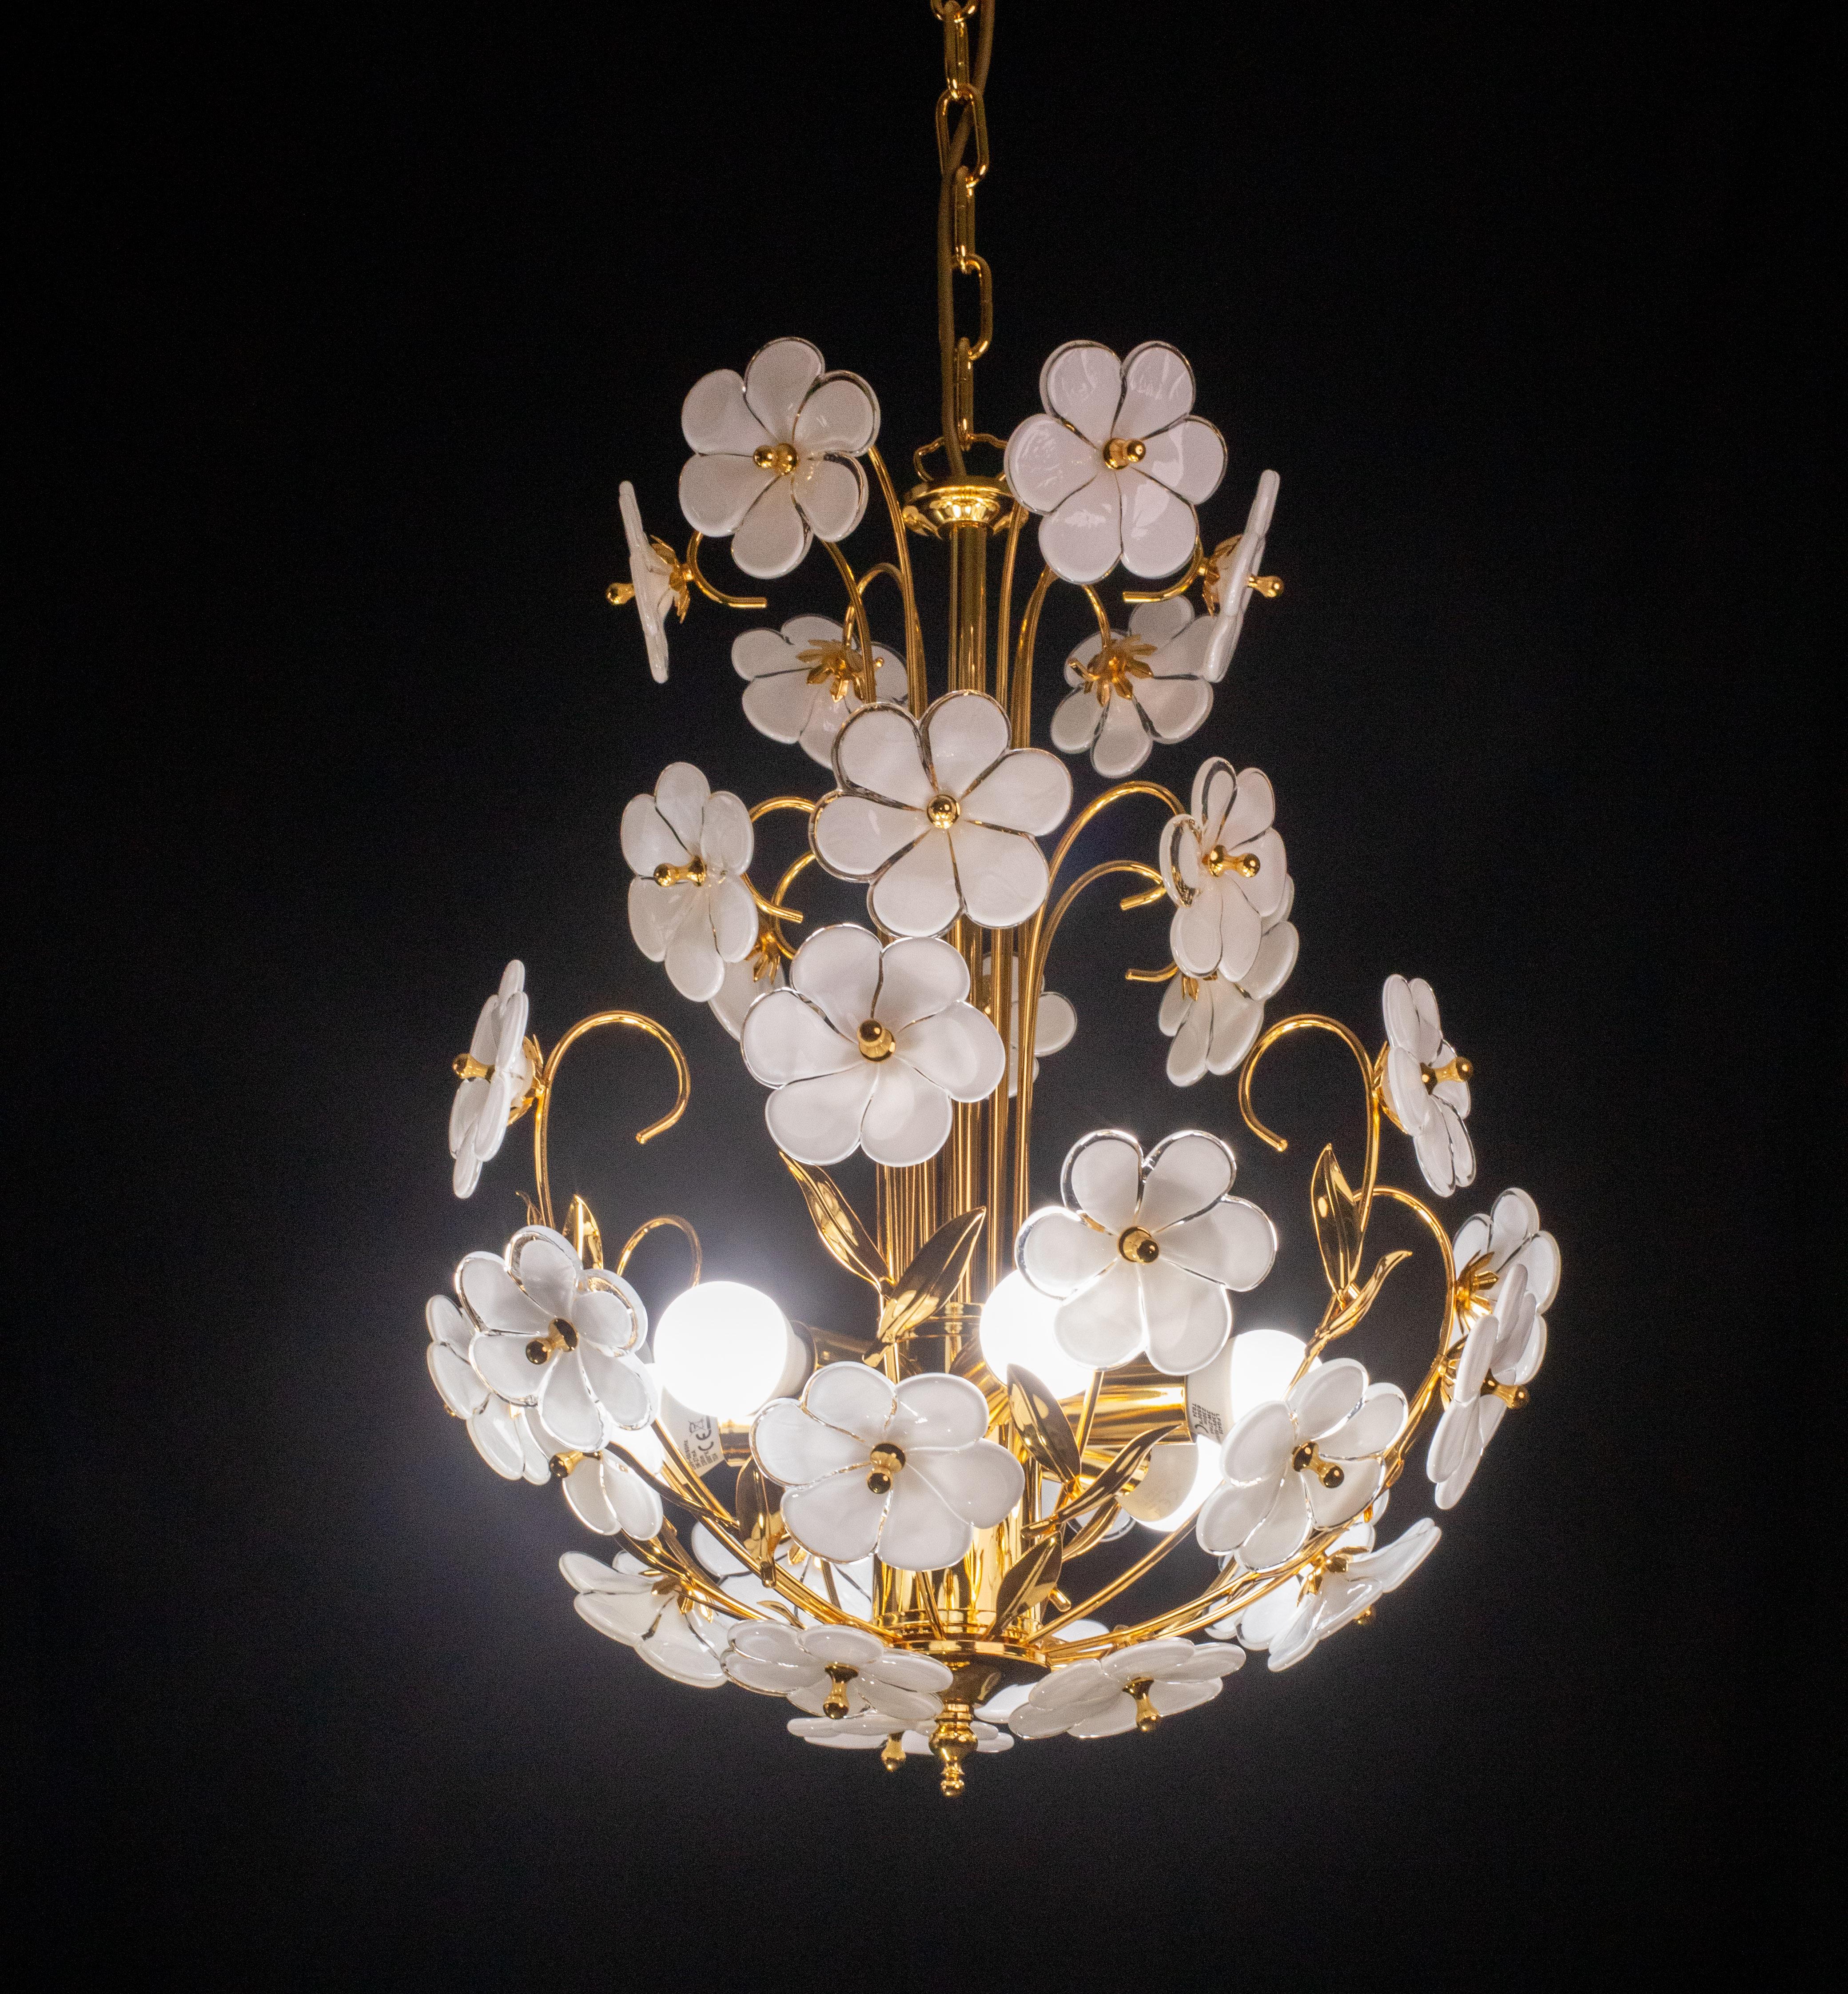 Vintage Murano glass chandelier full of white flowers.
The chandelier has 5 light points.
The structure is in gold bath, the gold bath has been restored and is therefore completely new.
The height of the chandelier is 110 cm with chain, 60 cm